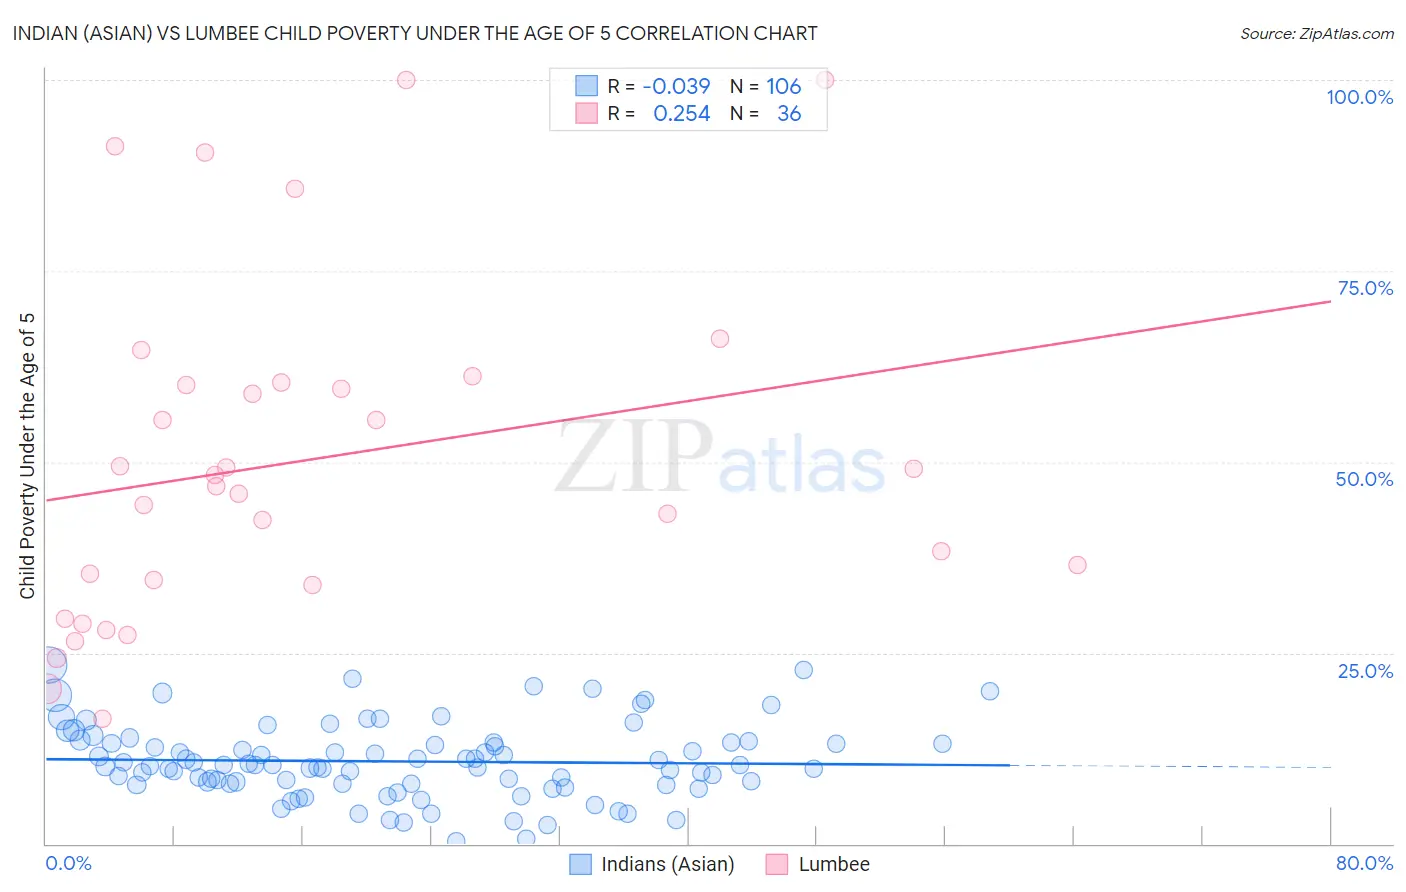 Indian (Asian) vs Lumbee Child Poverty Under the Age of 5